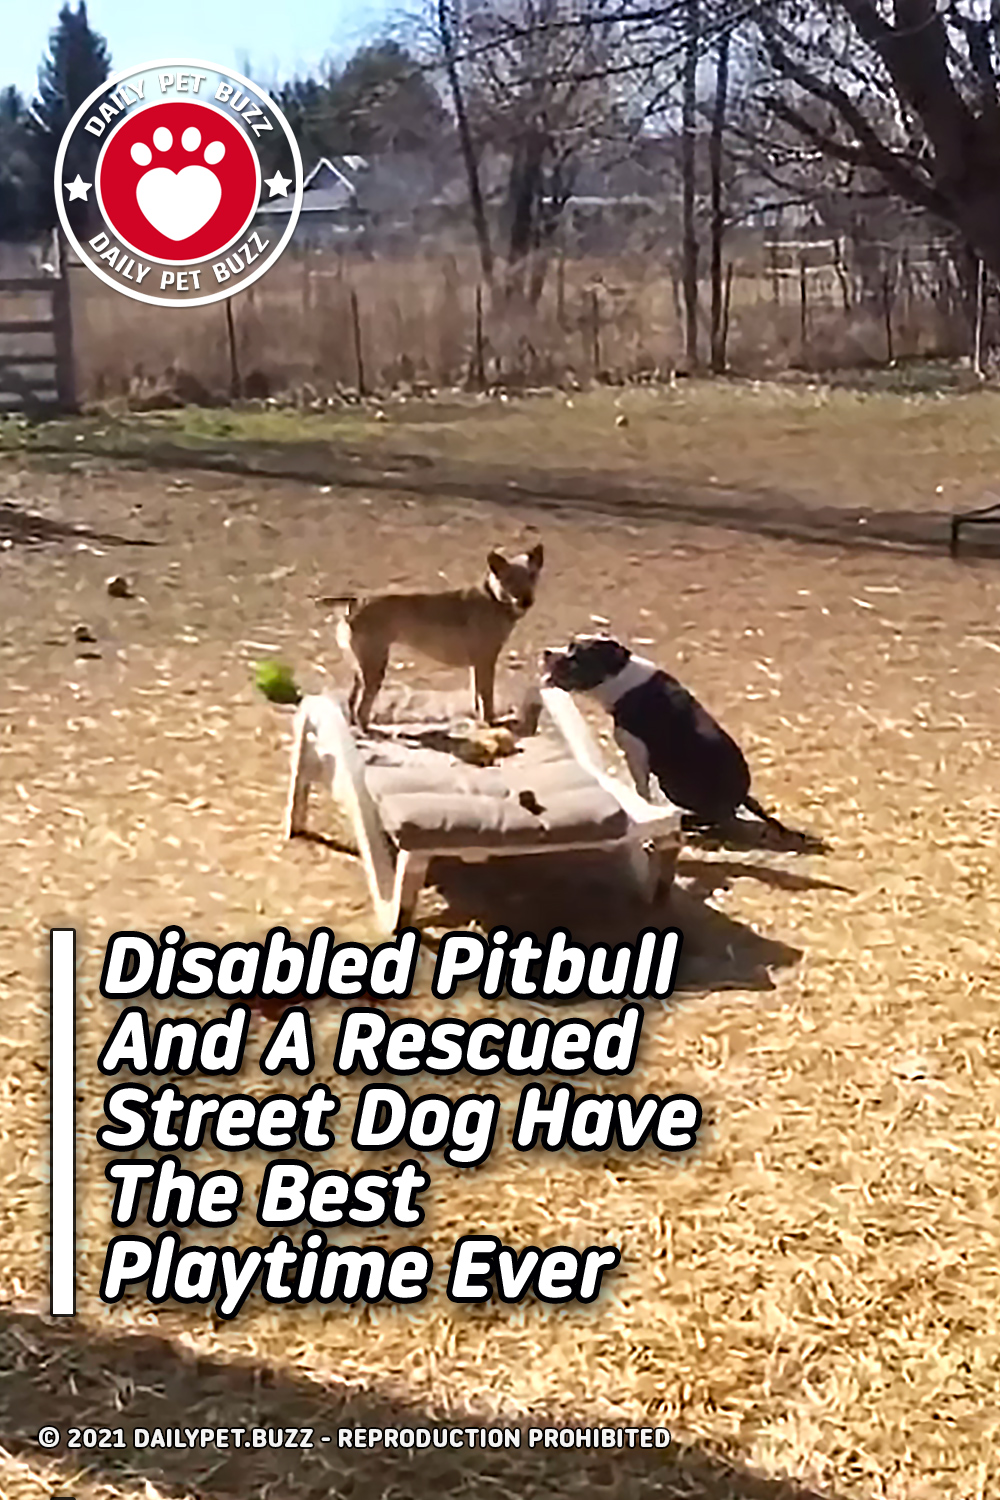 Disabled Pitbull And A Rescued Street Dog Have The Best Playtime Ever